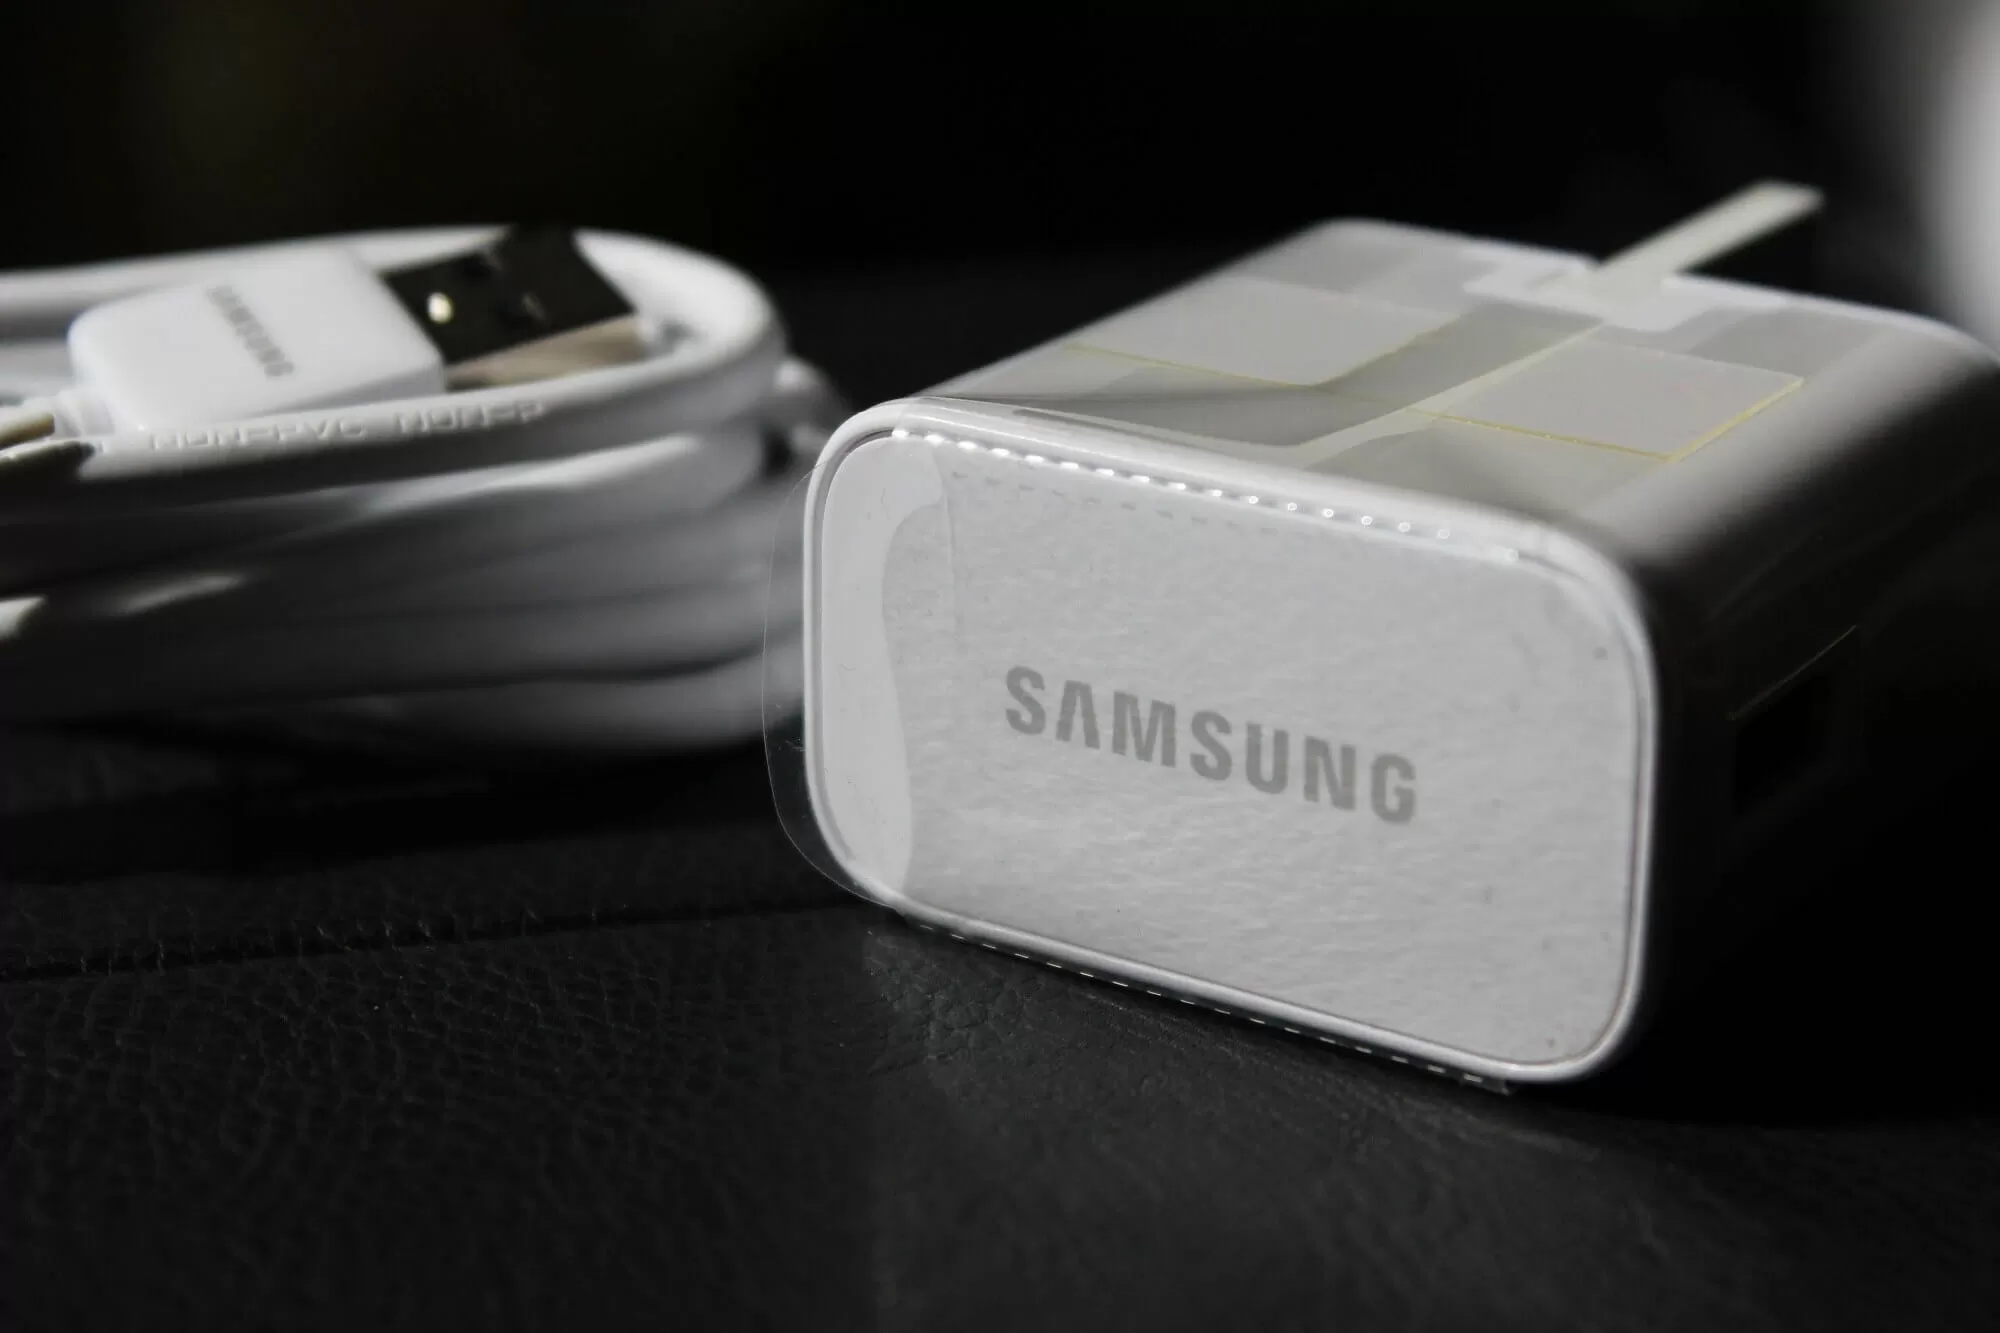 Rumors of Samsung unbundling chargers reinforced by removal of Apple-mocking Facebook post